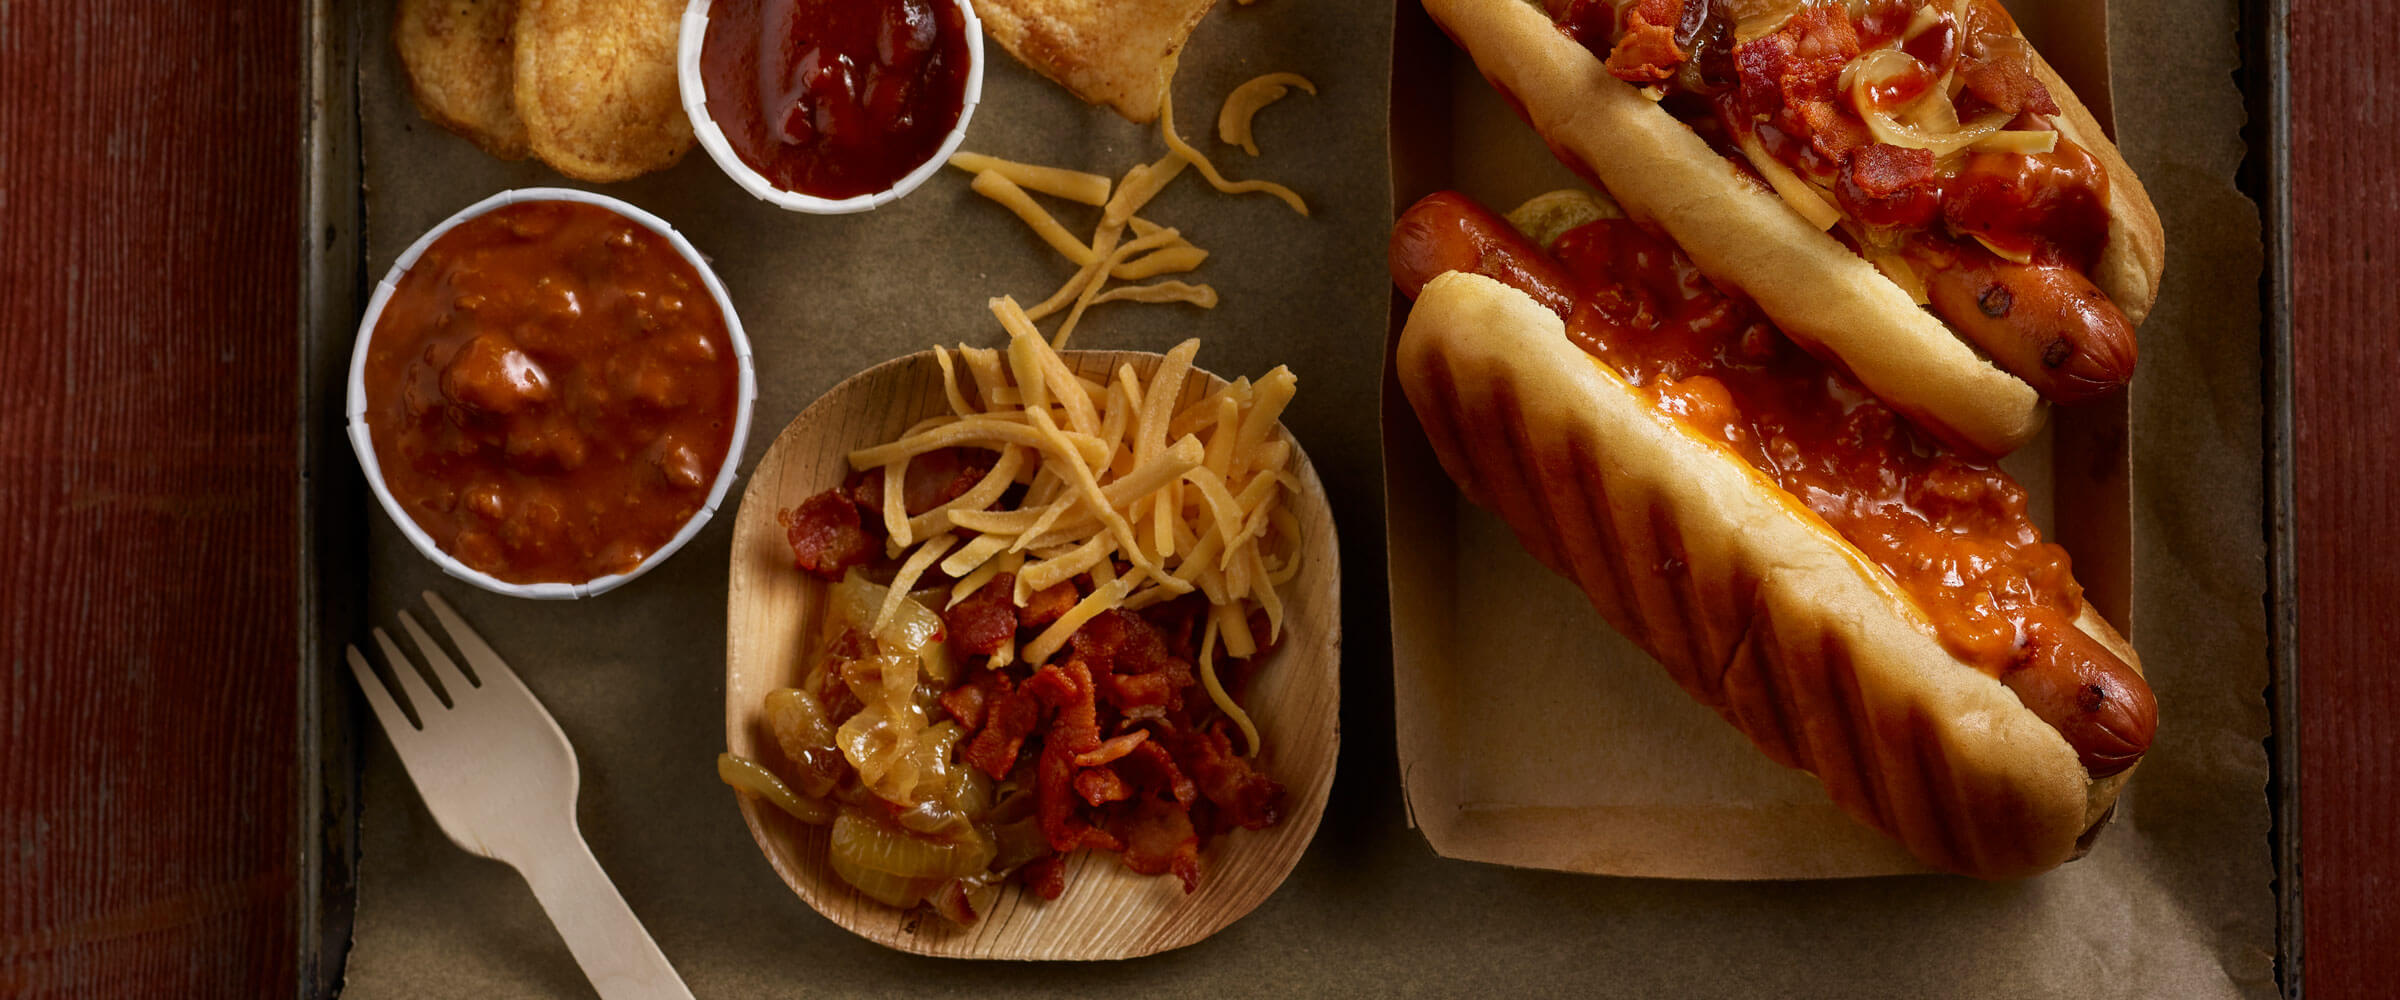 Cowboy Dogs topped with onions, bacon and cheese with extra toppings on side